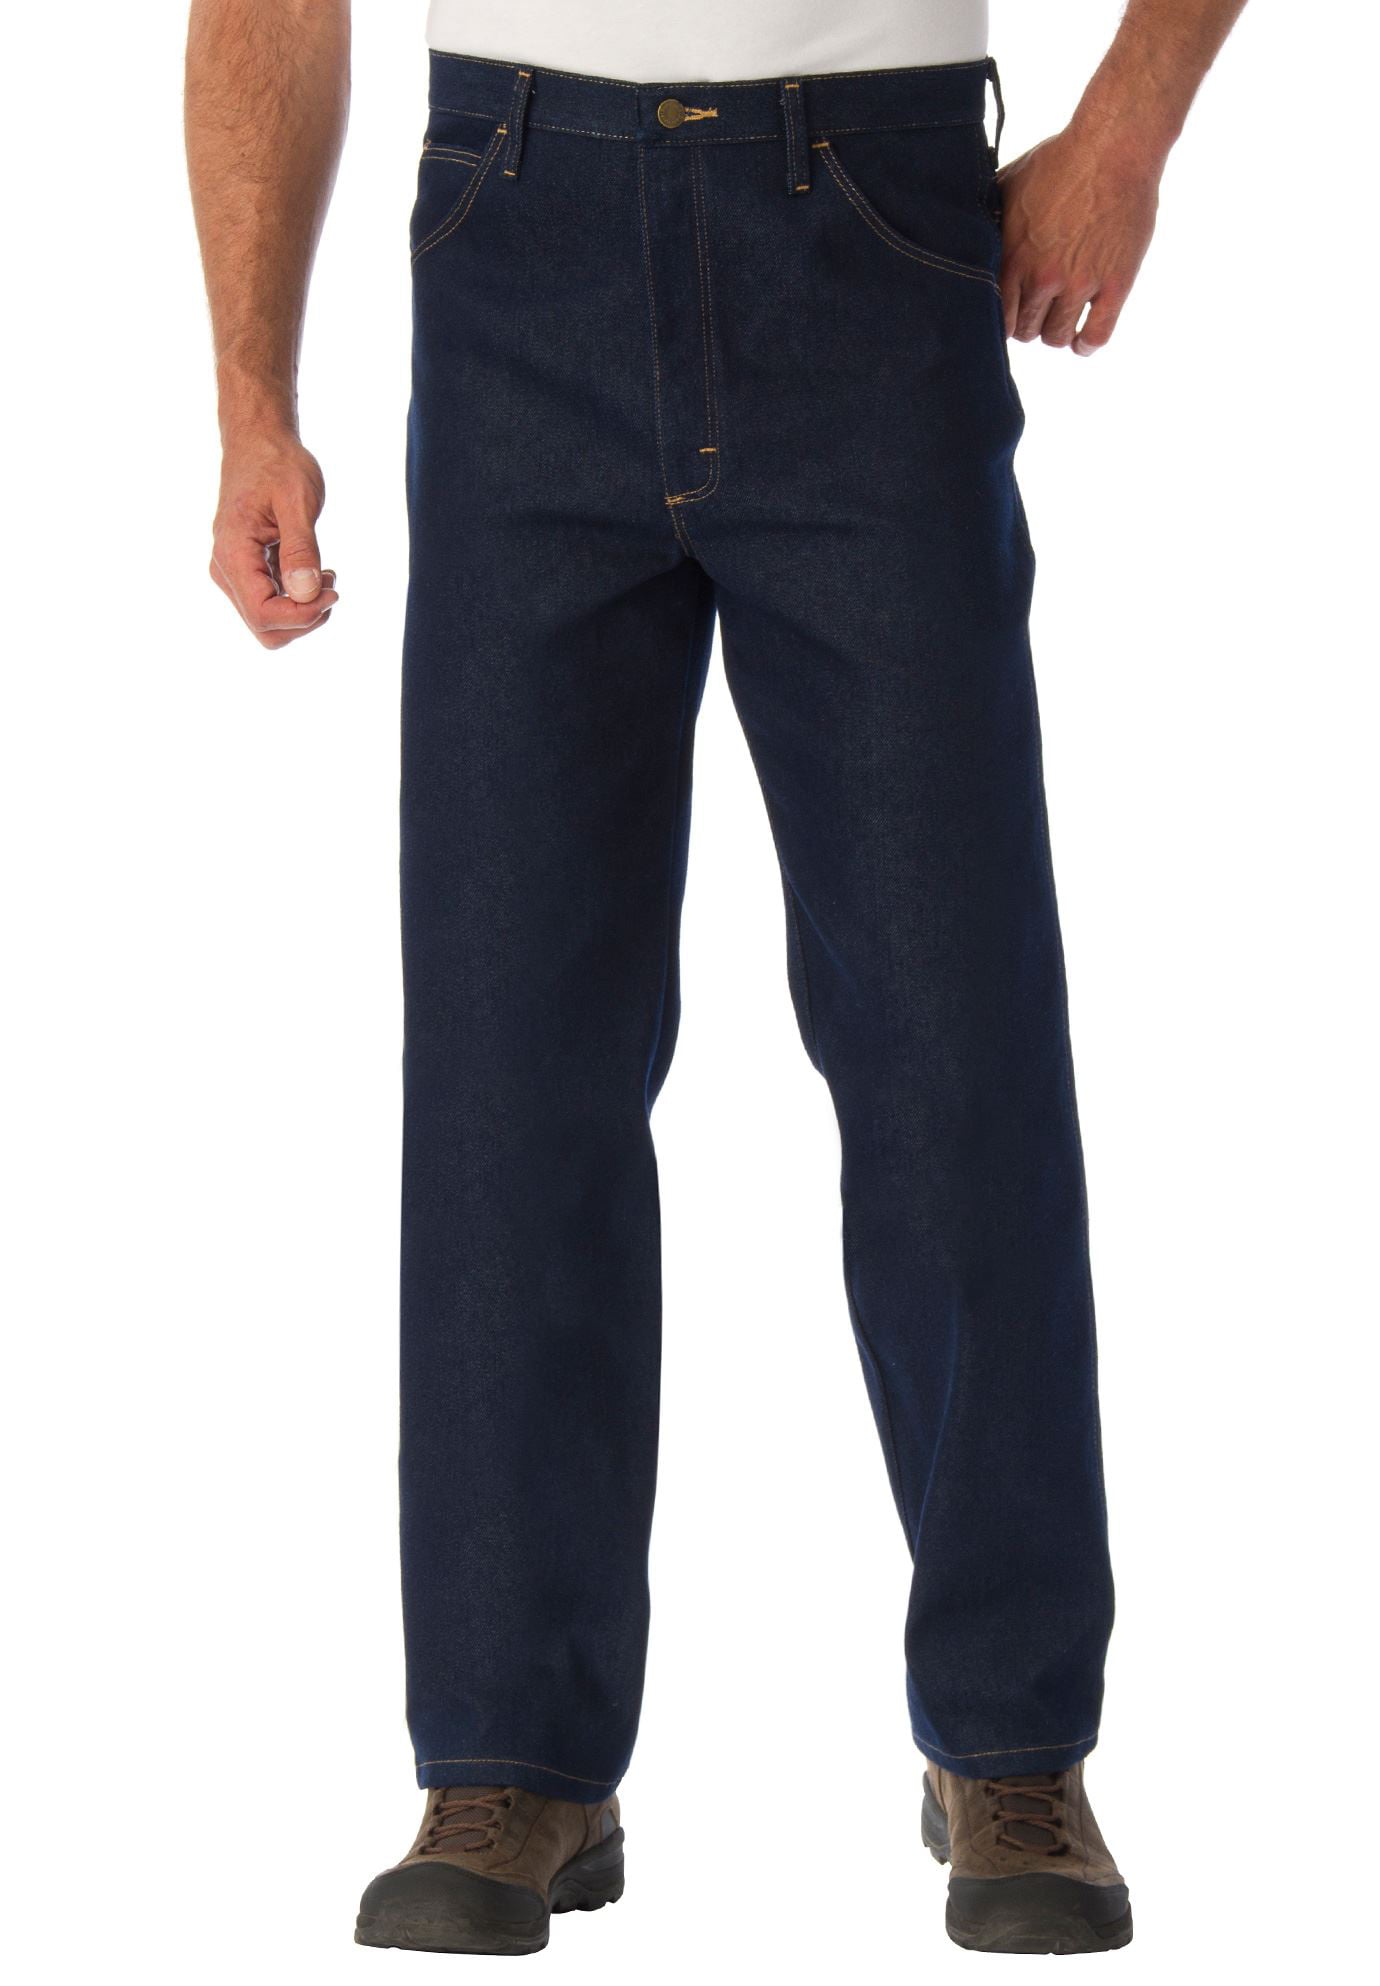 wrangler men's stretch jeans big and tall